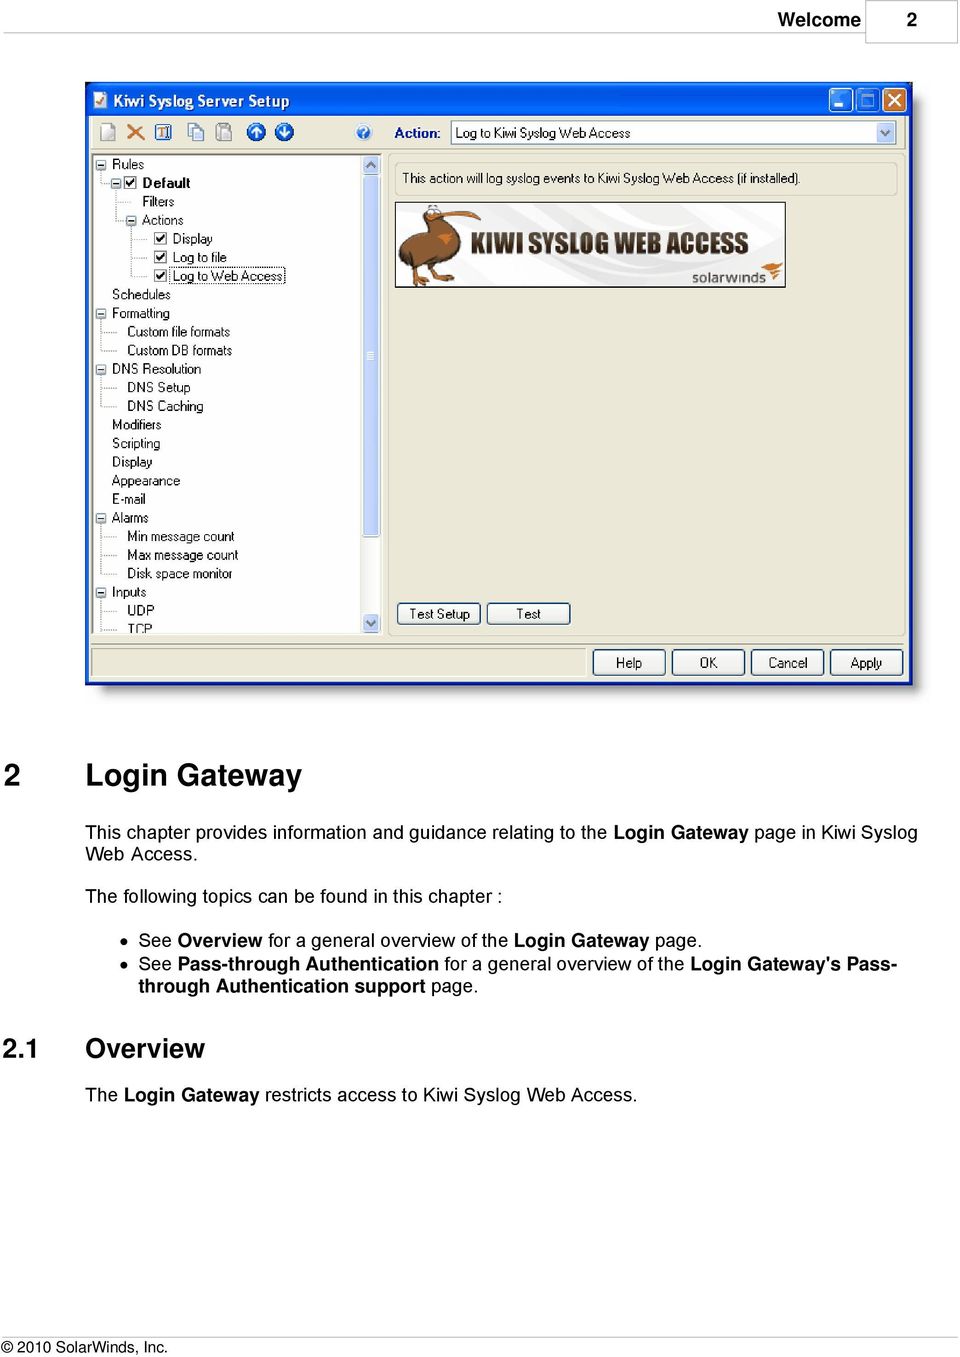 The following topics can be found in this chapter : See Overview for a general overview of the Login